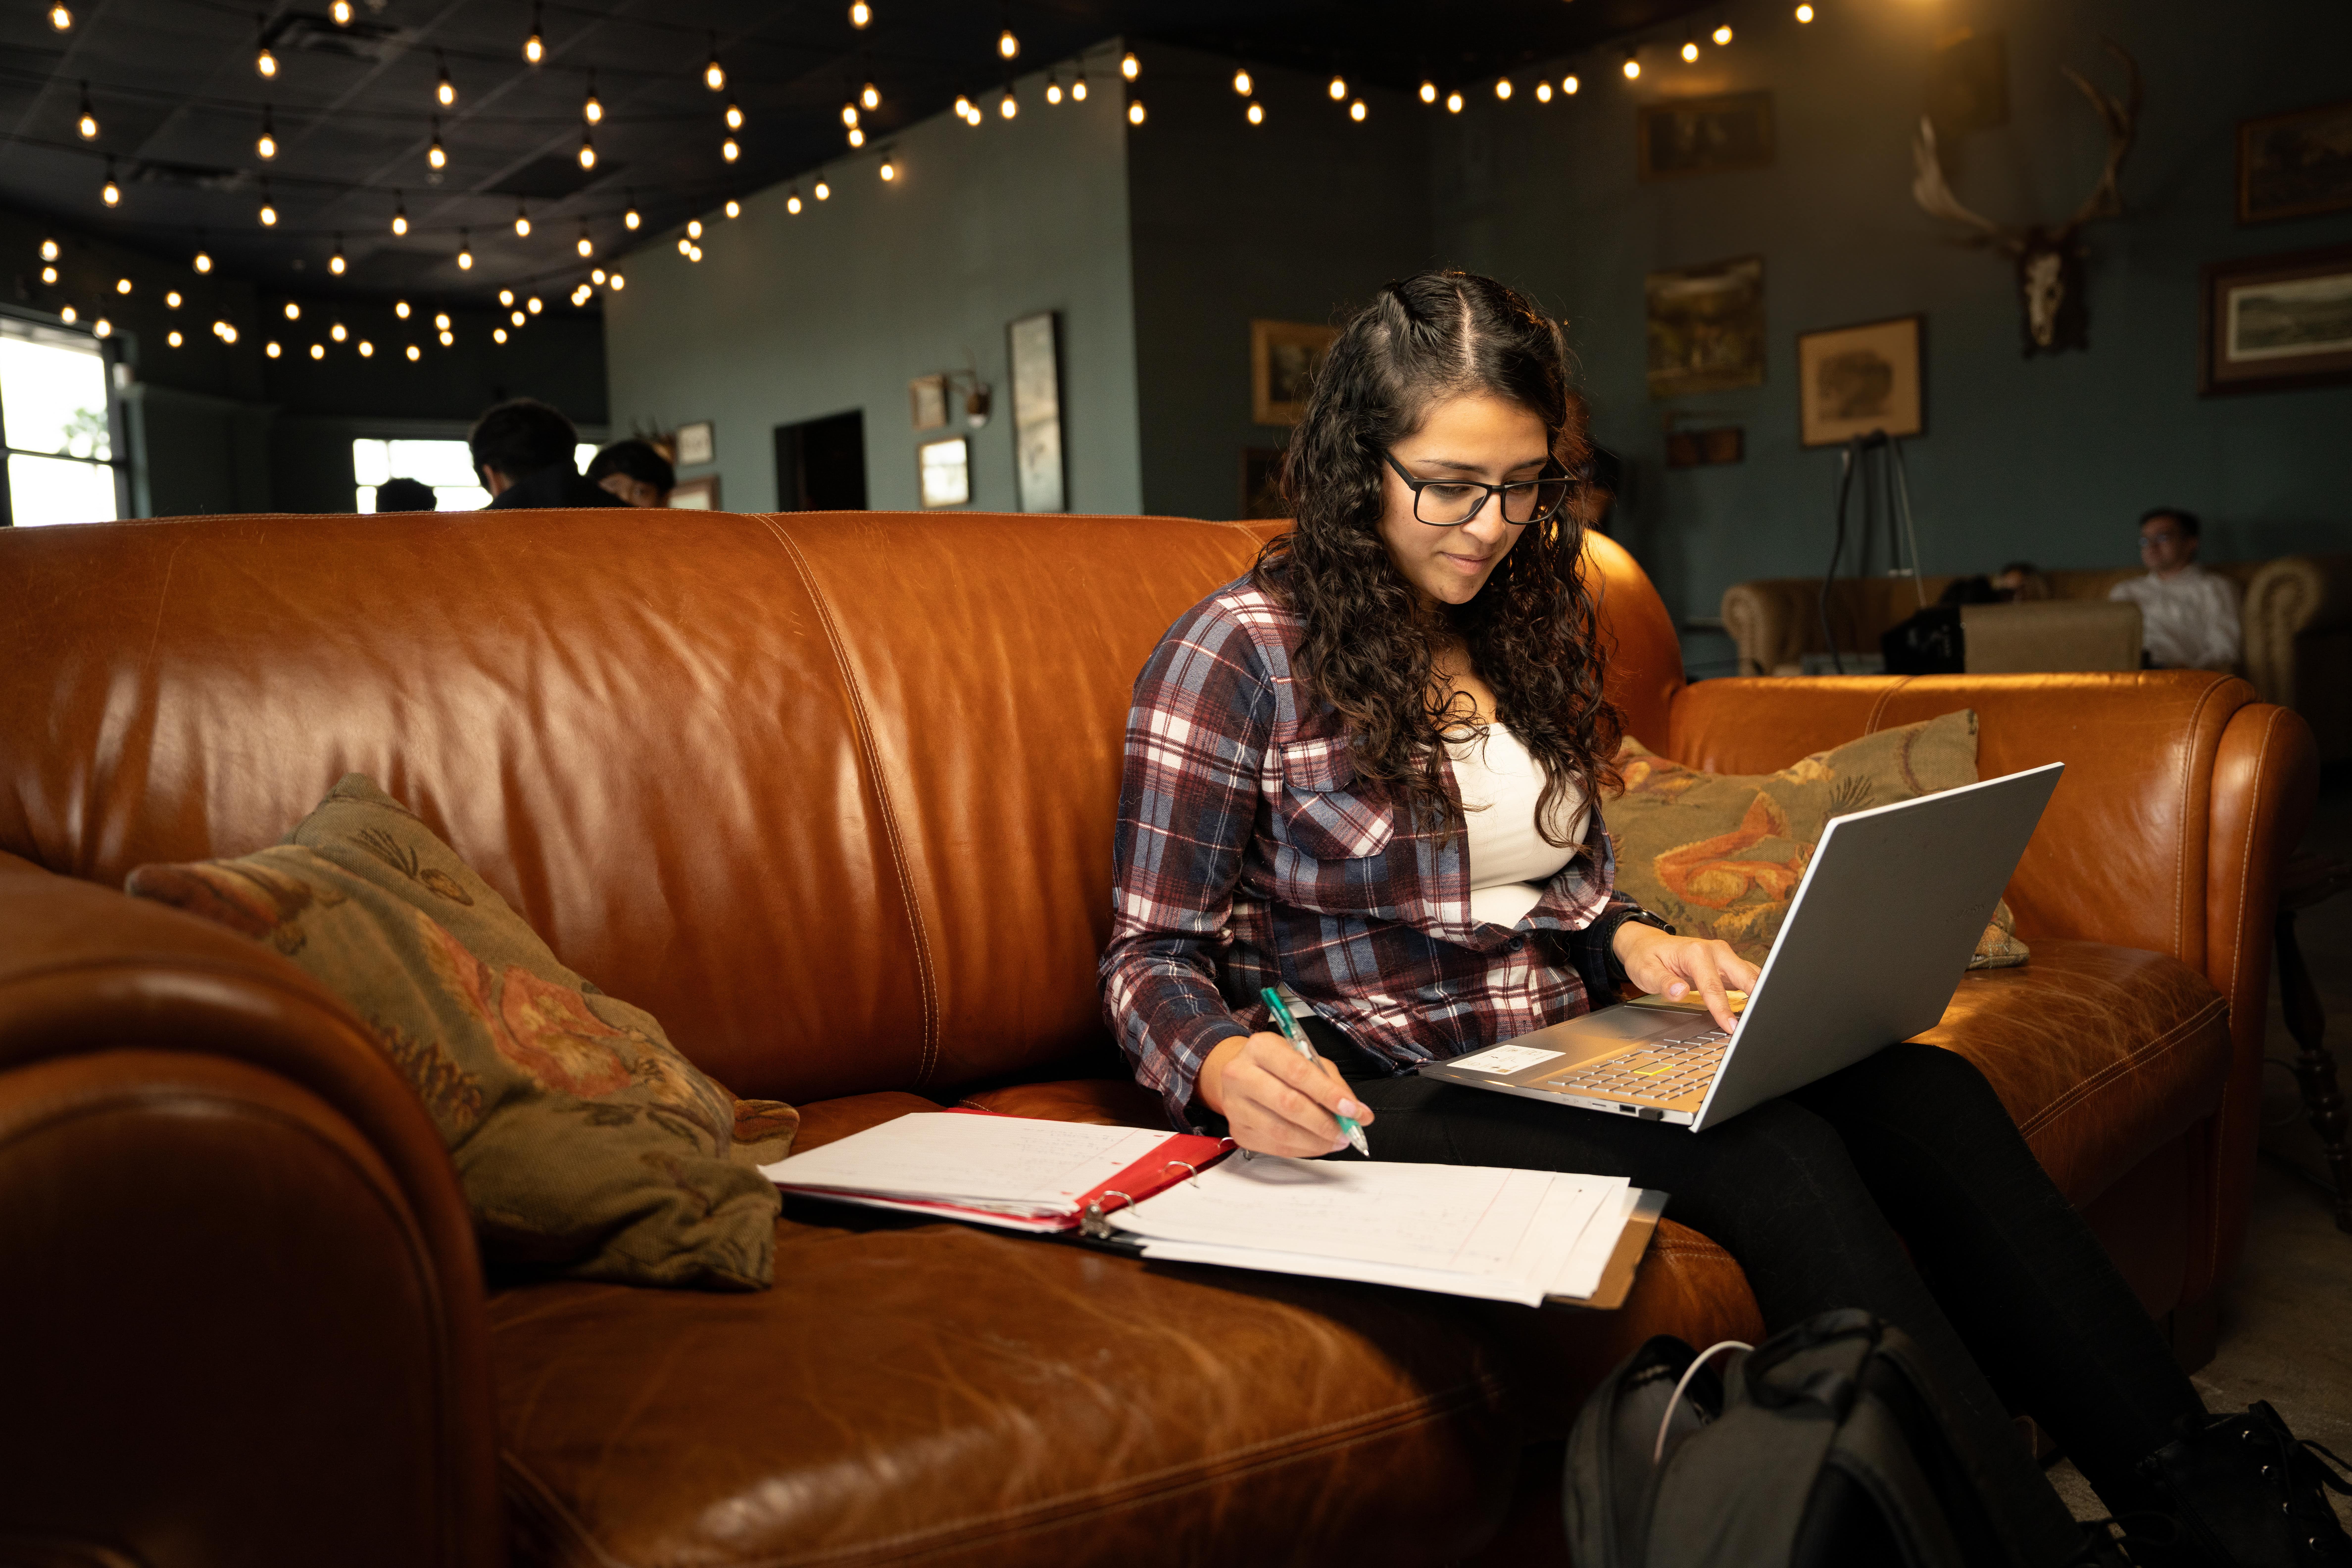 A student sits with a laptop open on her lap, sitting in an overstuffed leather sofa.